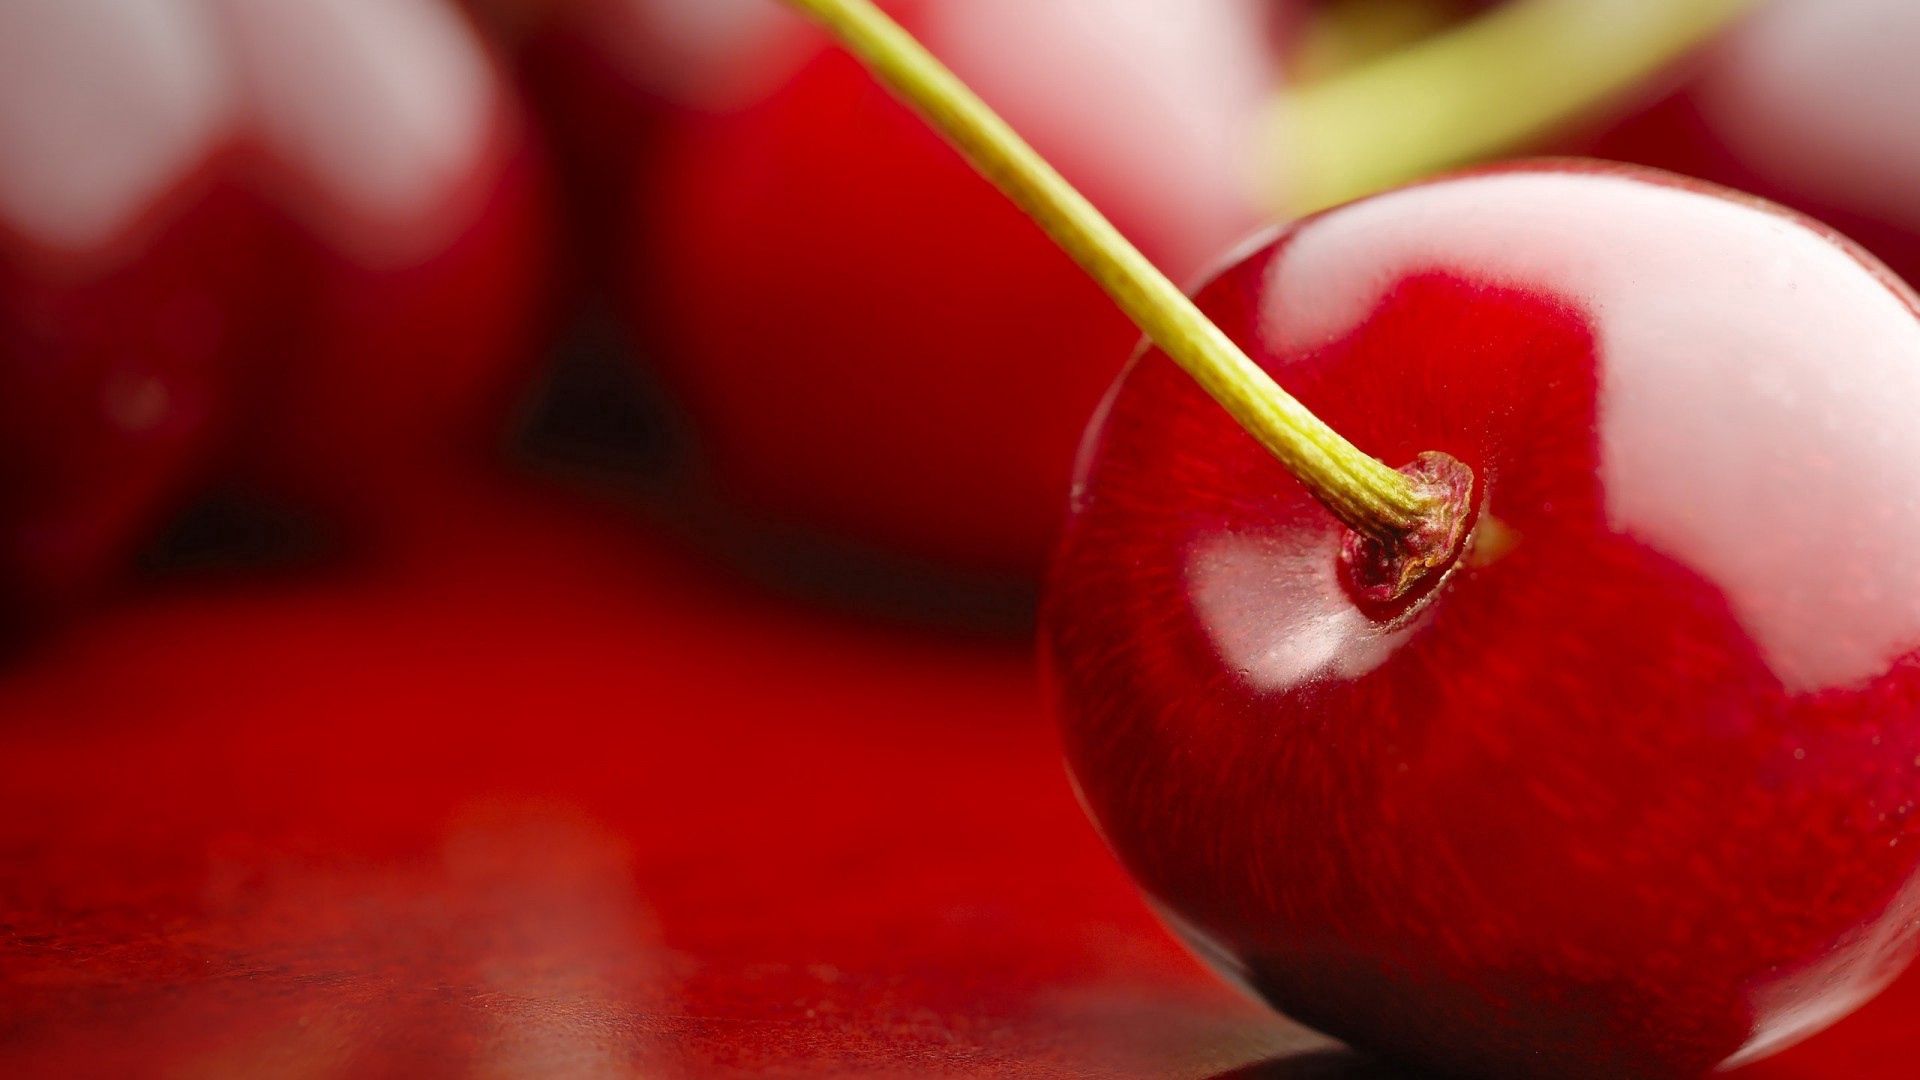 66066 download wallpaper sweet cherry, red, macro, berry, ripe screensavers and pictures for free